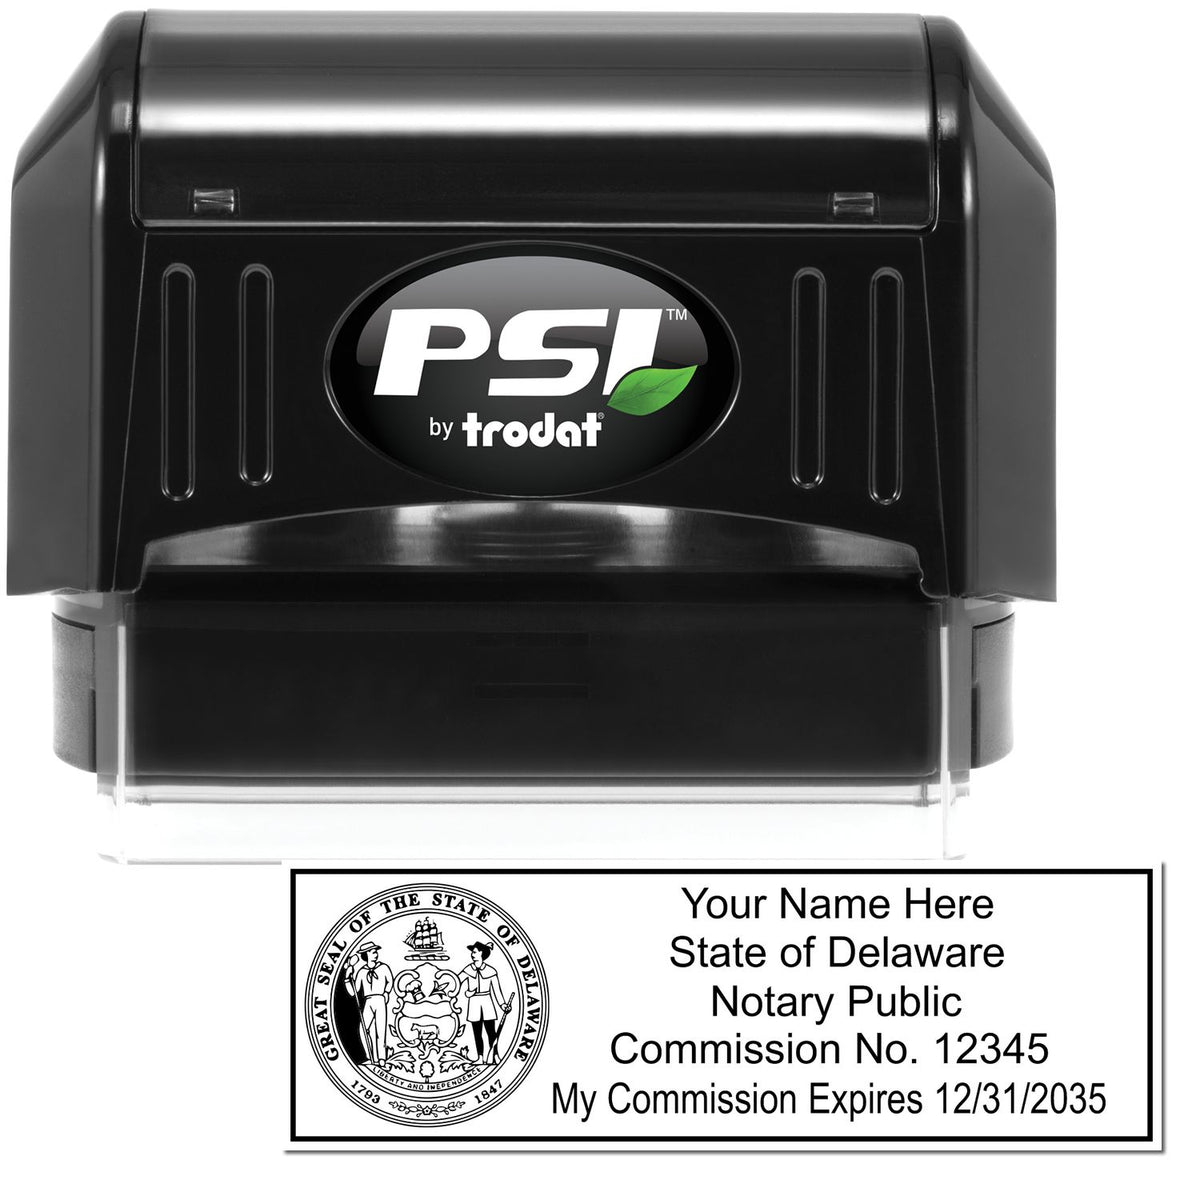 The main image for the PSI Delaware Notary Stamp depicting a sample of the imprint and electronic files